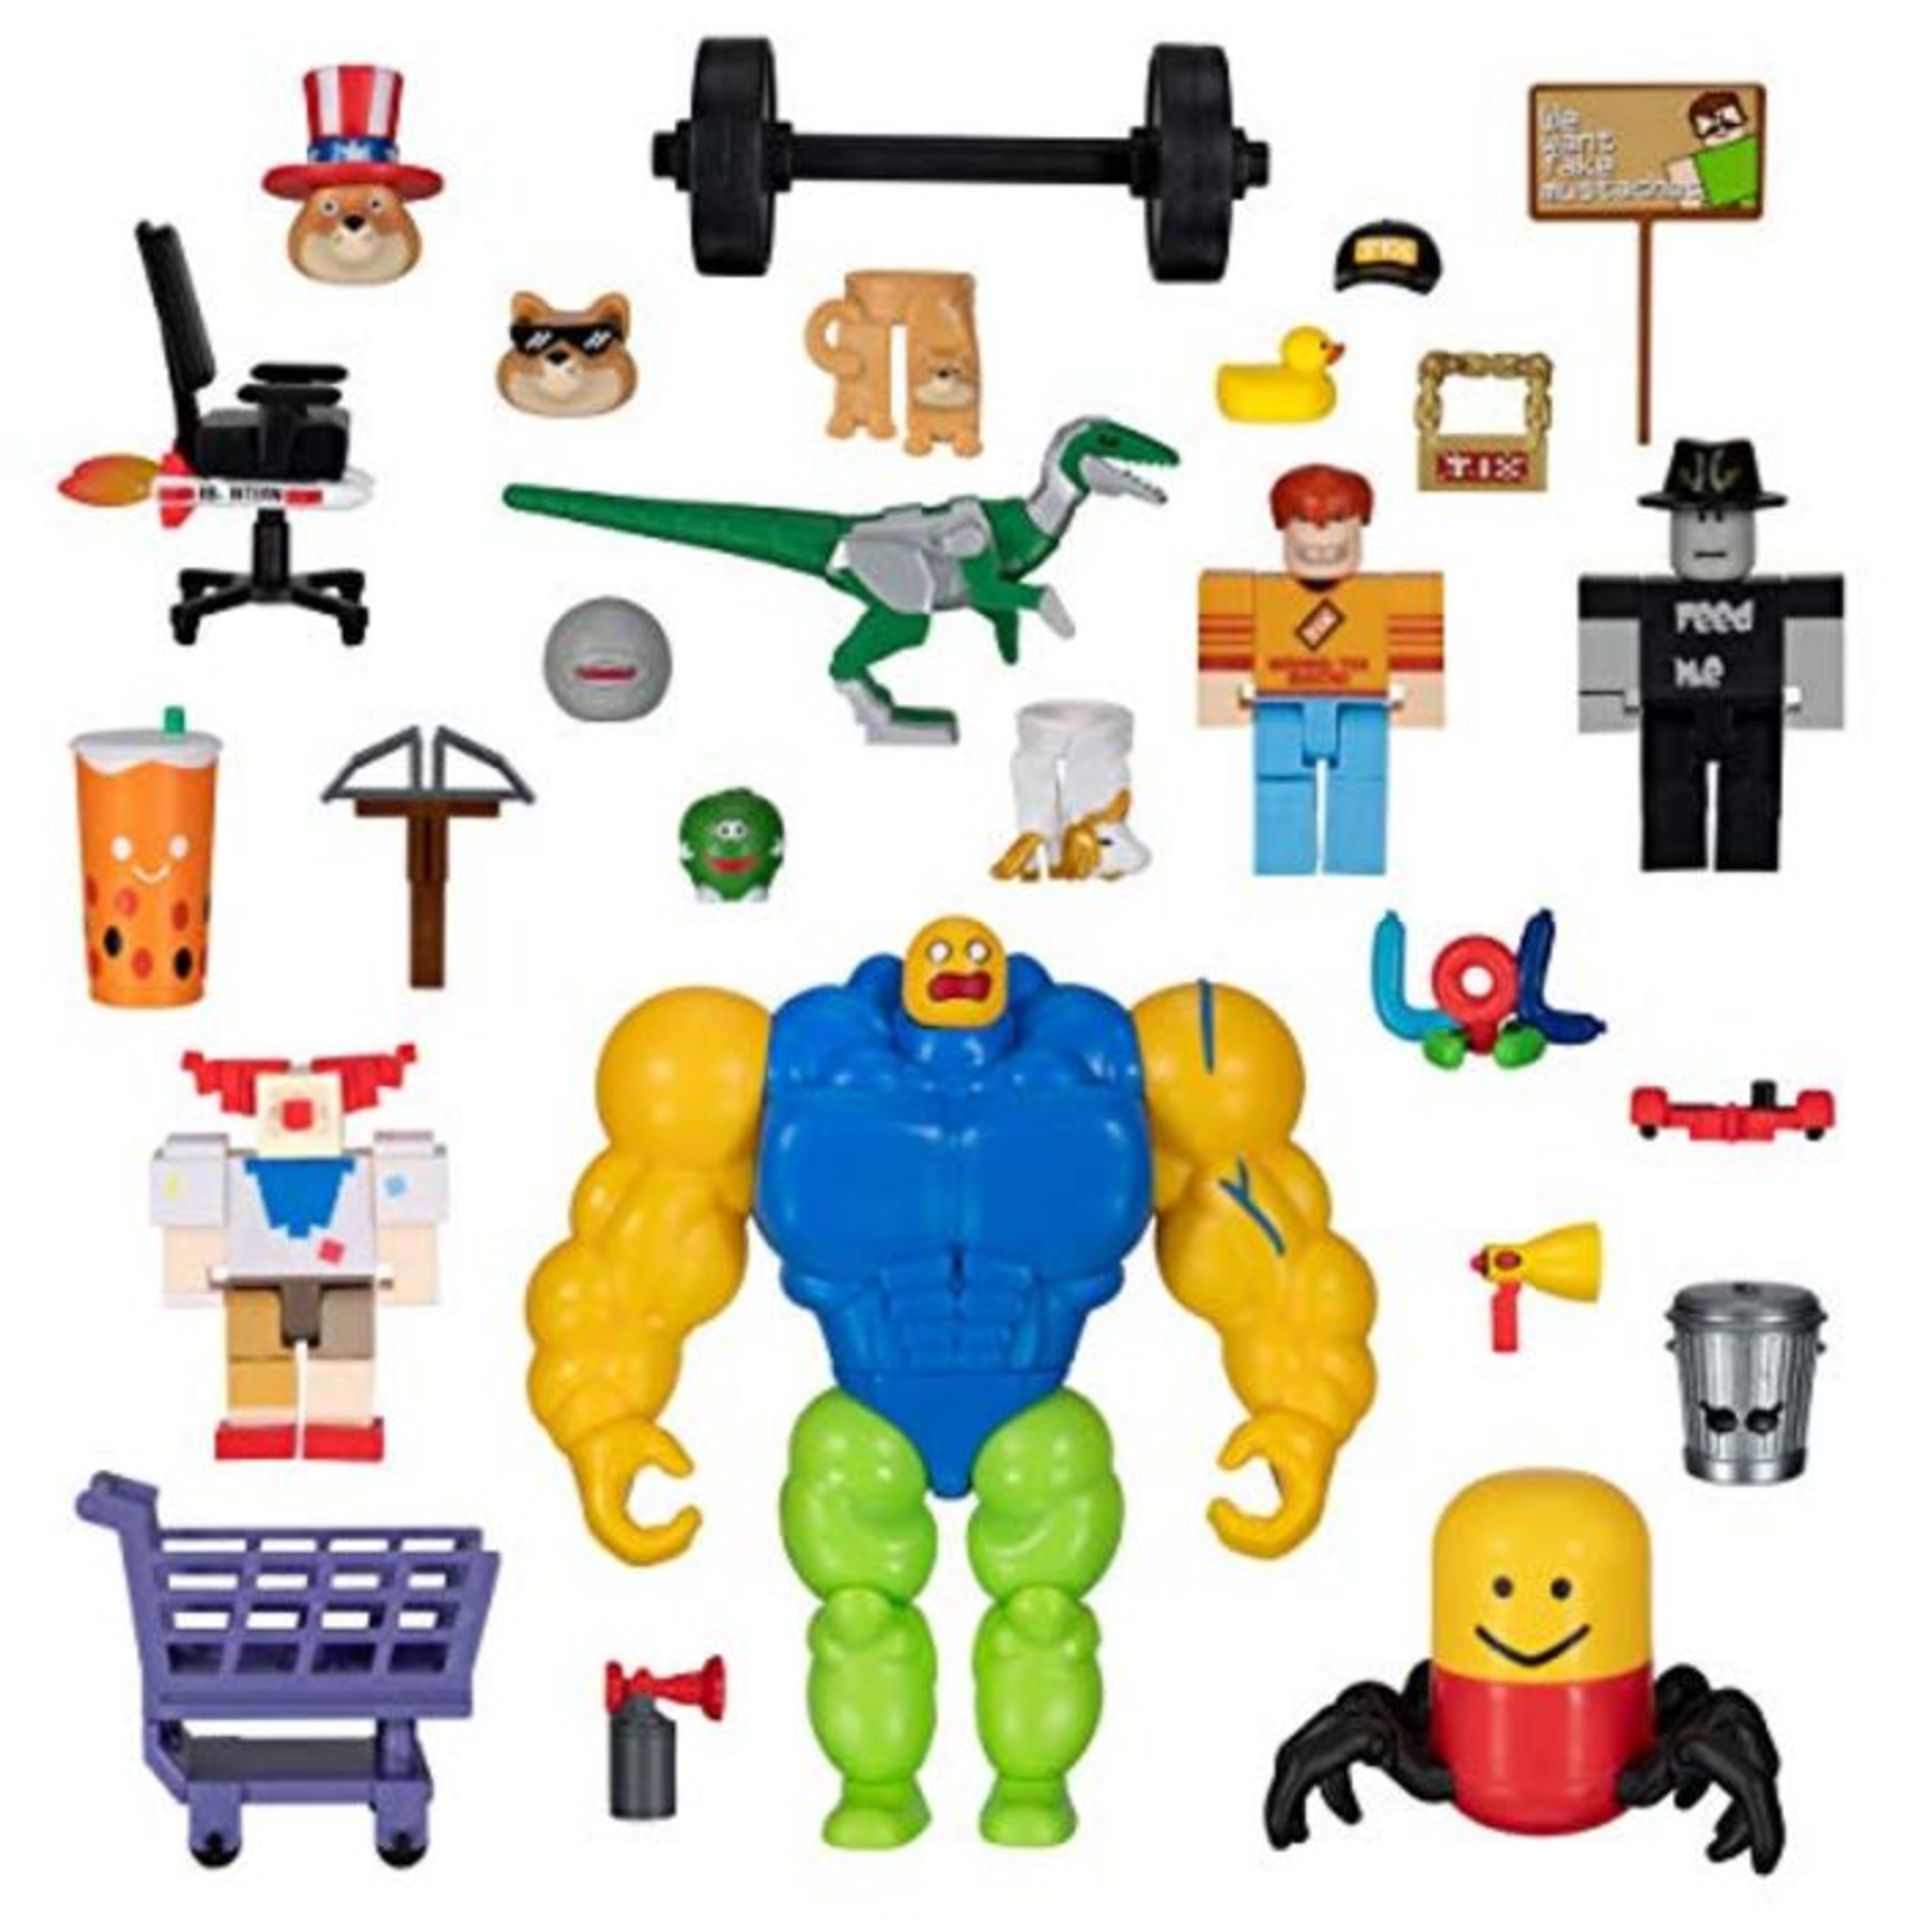 Roblox ROB0338 Action Collection-Meme Pack Playset [Includes Exclusive Virtual Item]